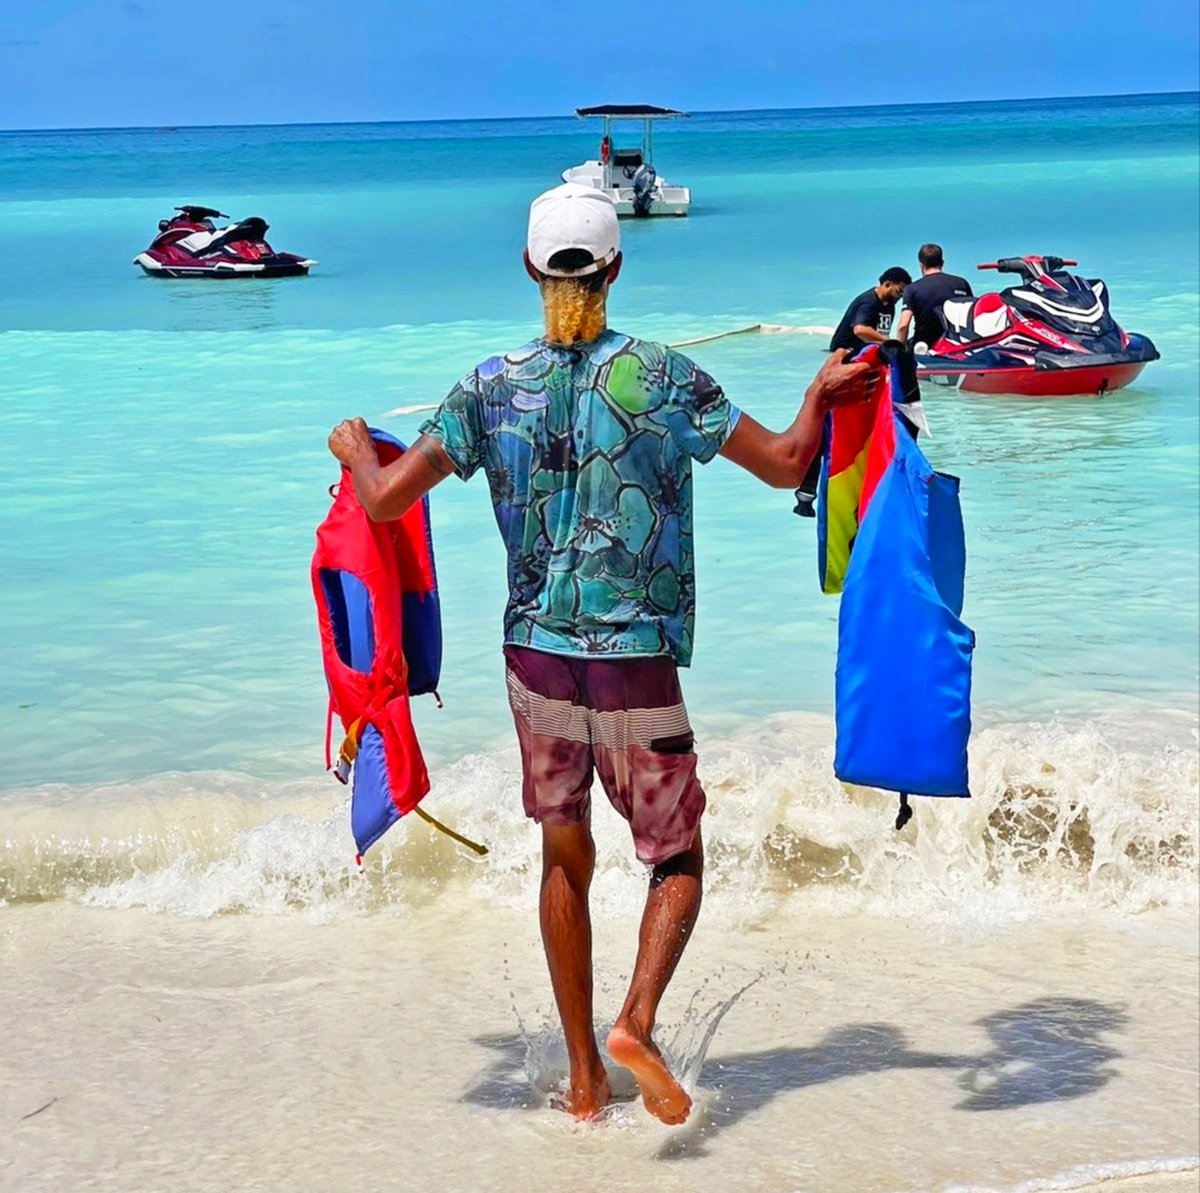 Let's have fun but safety first🌞🏝️🌊
.
skydive.sc/fly-seychelles…
.
#watersports #islandlife #jetskis #waterlovers #tropicalislands #adrenalinejunkies #extreme #flyseychelles #fun #outdoors #activelife #extremesports